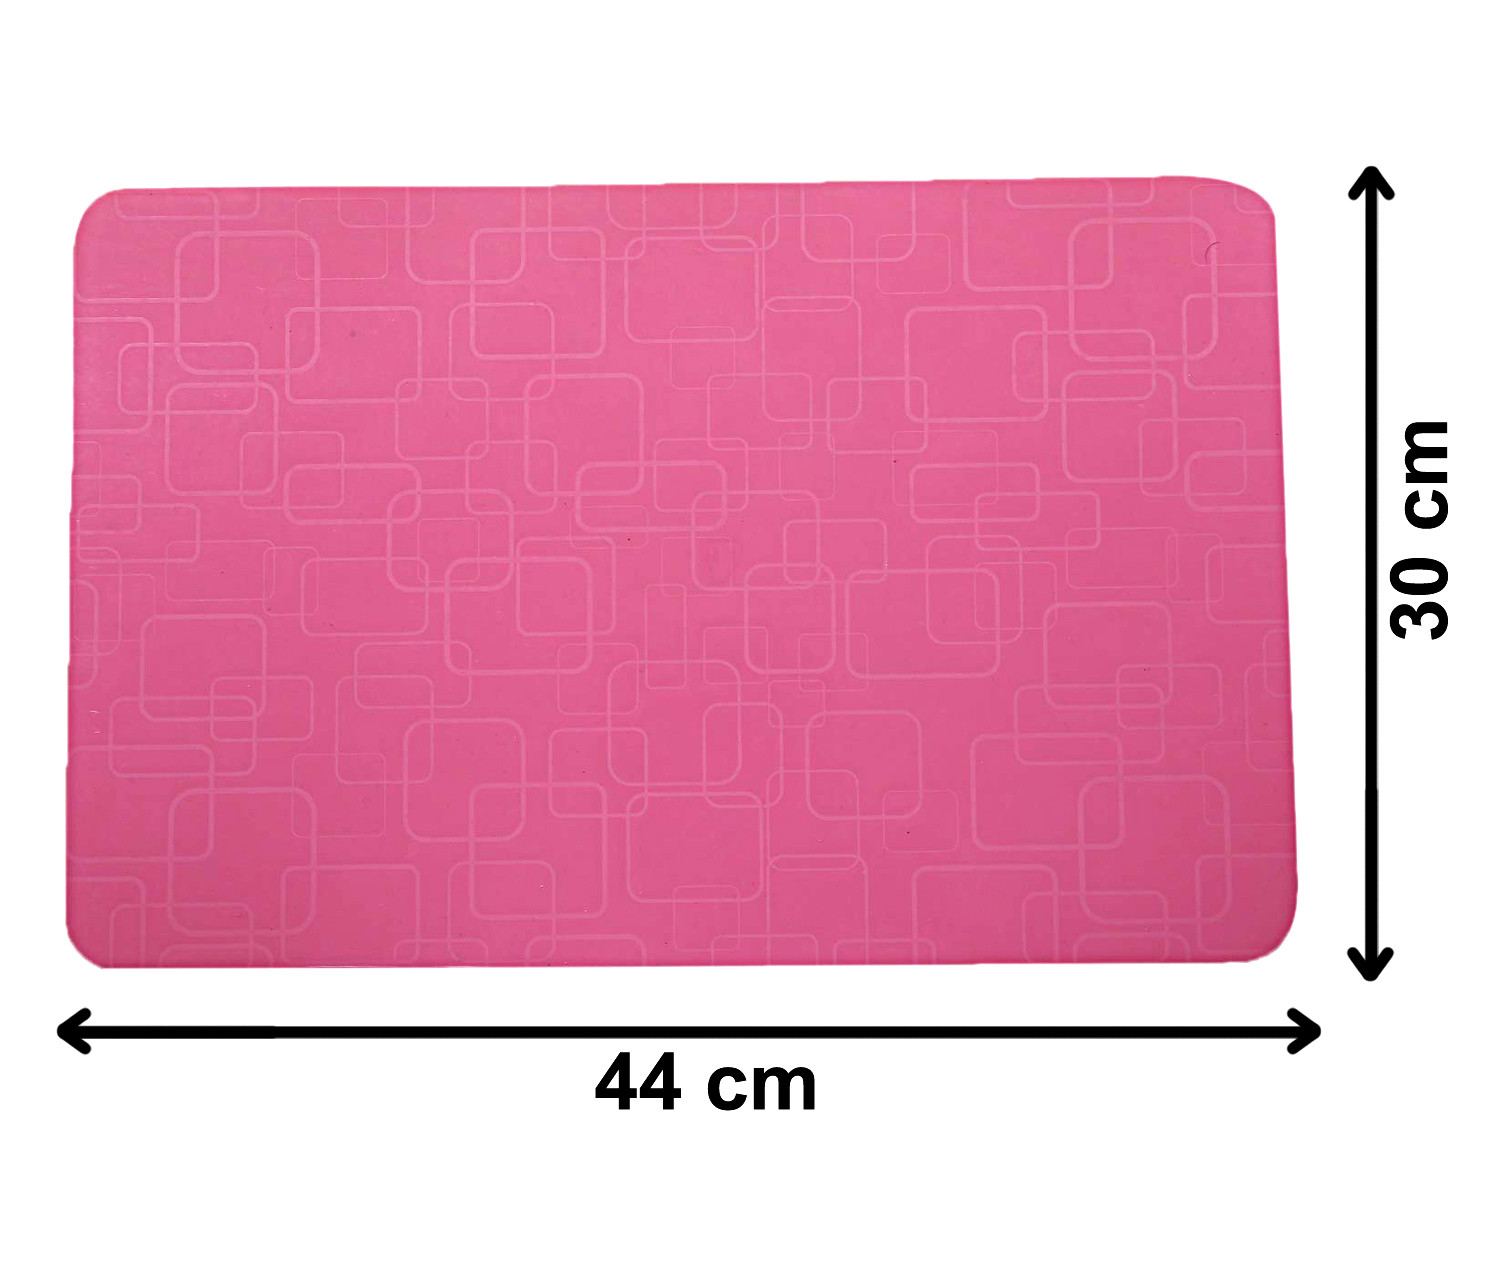 Kuber Industries Placemats Table Mats Easy to Clean PVC Place Mats for Dining, Set of 6 (Pink)